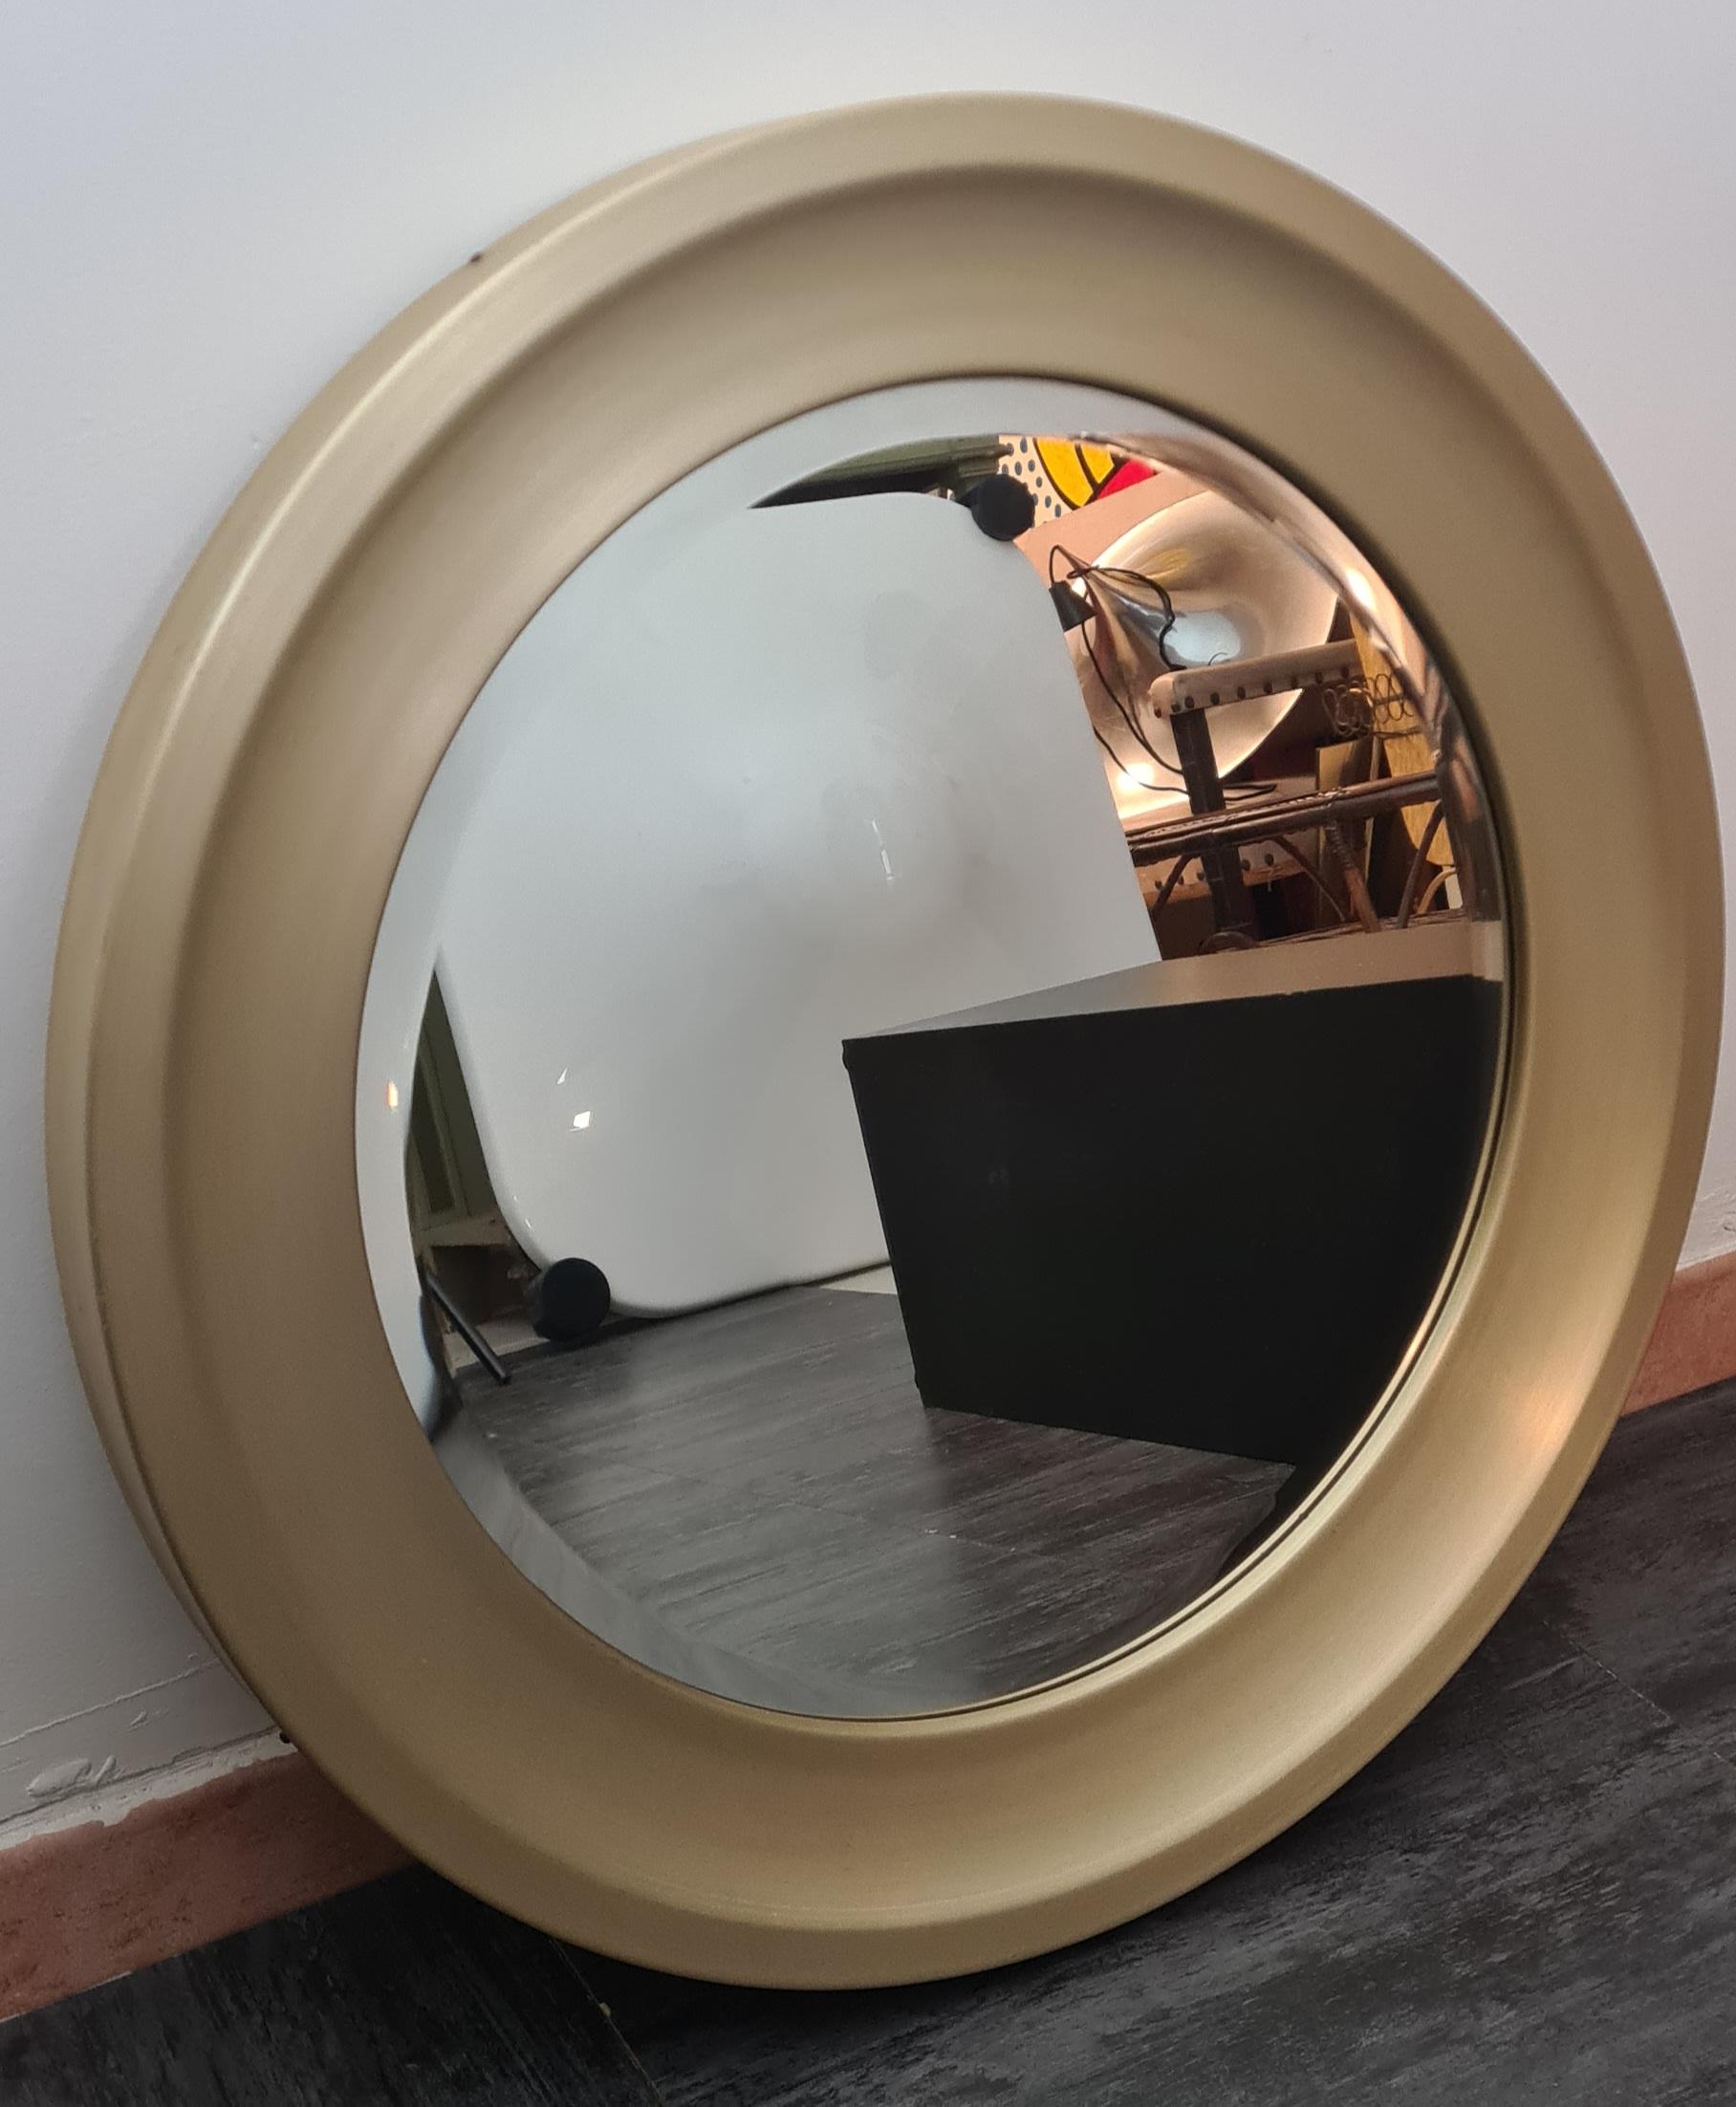 Round mirror designed by Sergio Mazza for Artemide.

Refined mirrors with a round shape and ground beading with a gold-plated and brushed aluminum frame.

The back of the mirror is made of pressed wood with a hook for hanging.

This elegant mirror